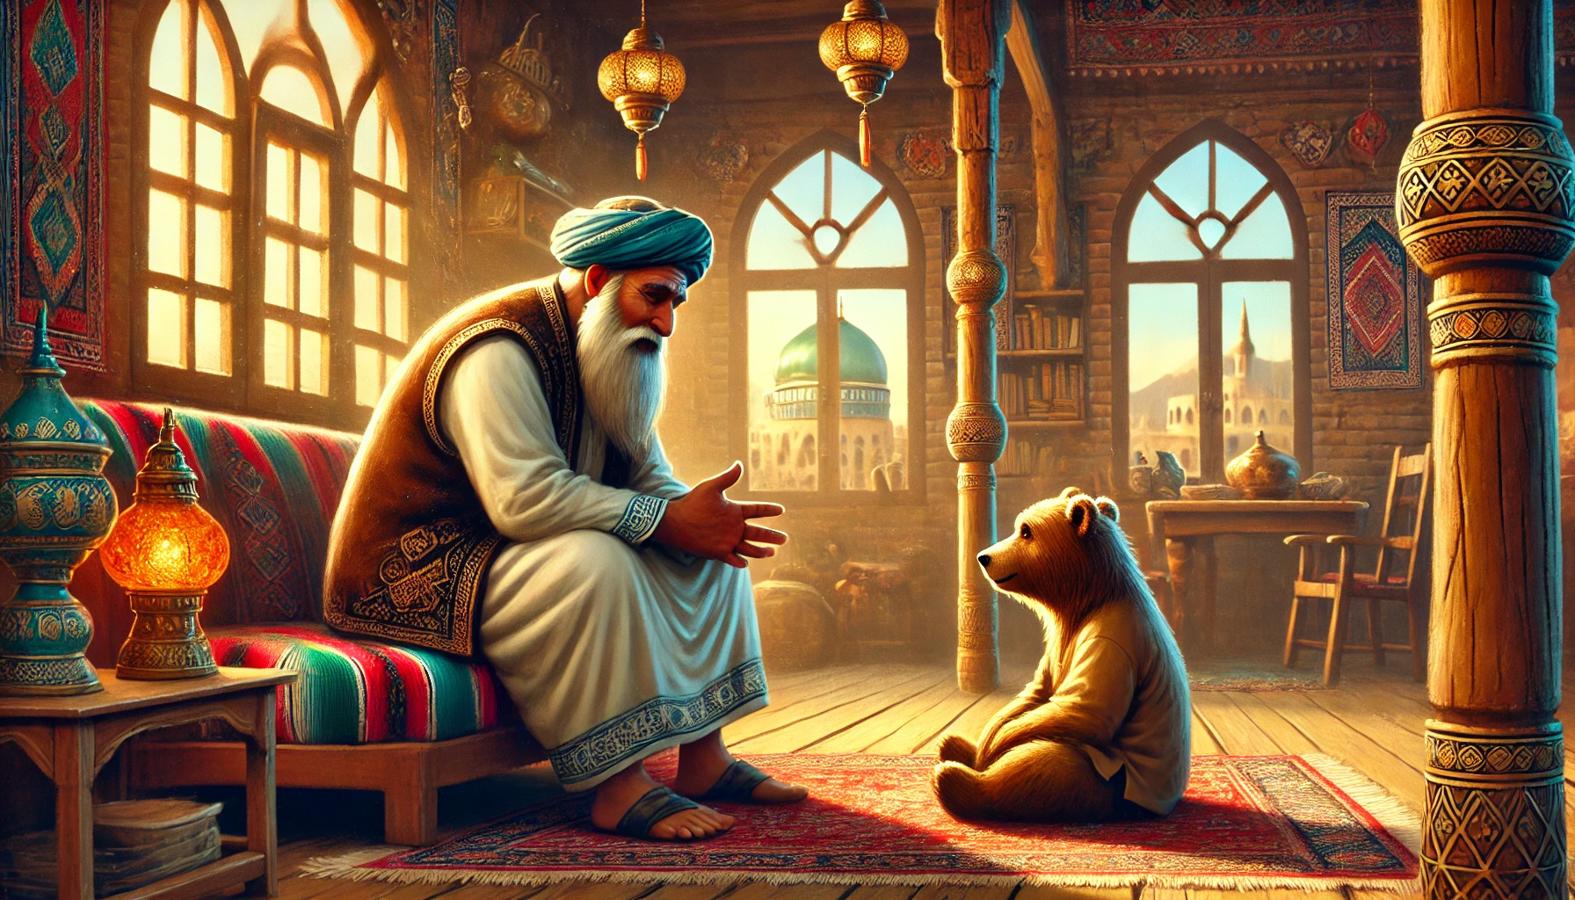 Abbas sitting at home, confiding in his wise father.